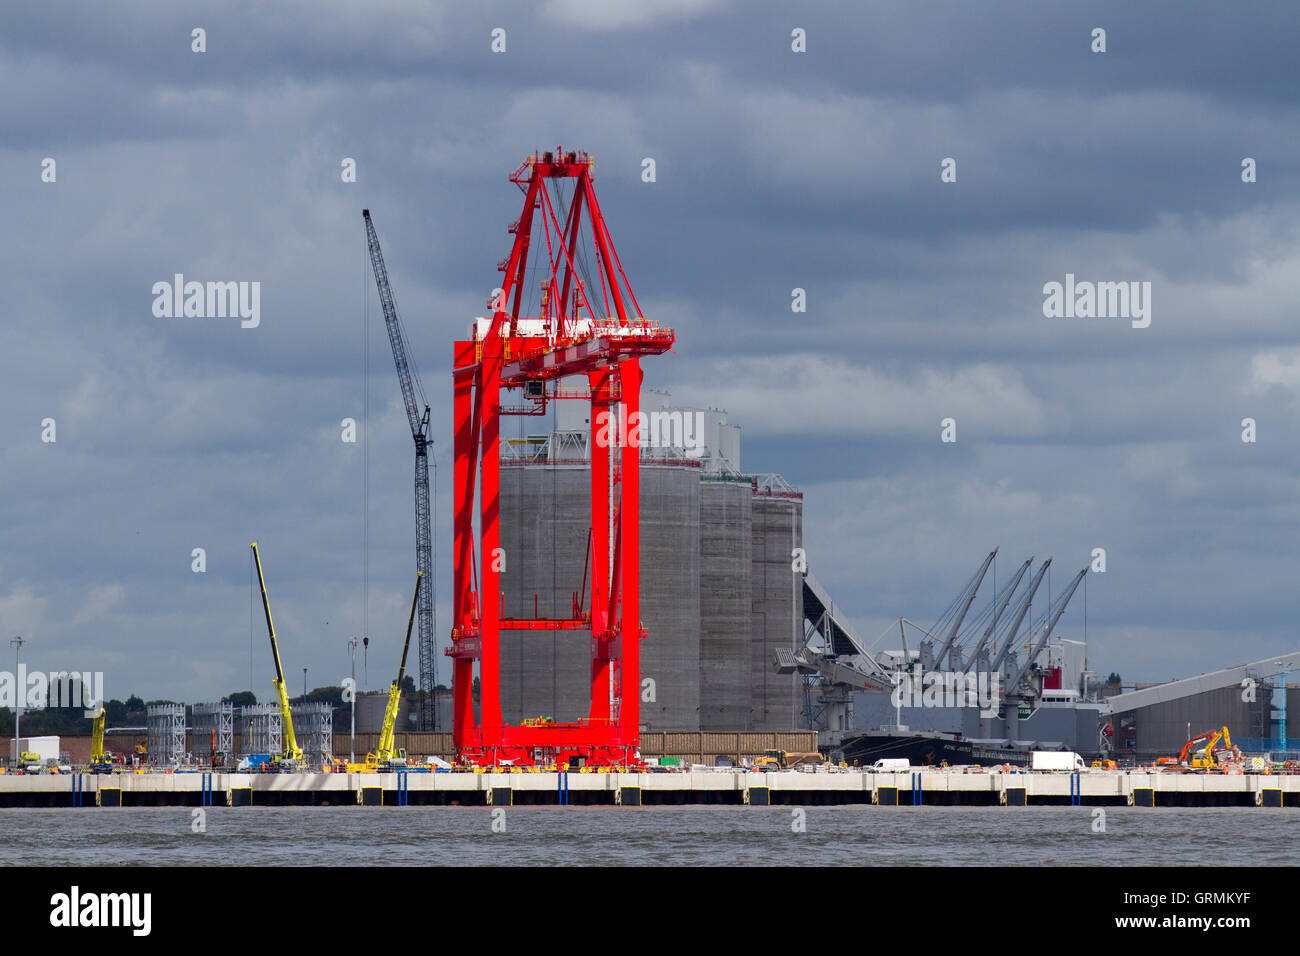 Operational cantilever rail-mounted gantry (CRMG) cranes; A single tall Megamax container unloading crane at Seaforth as seen from New Brighton, Wallasey, Liverpool, UK Stock Photo